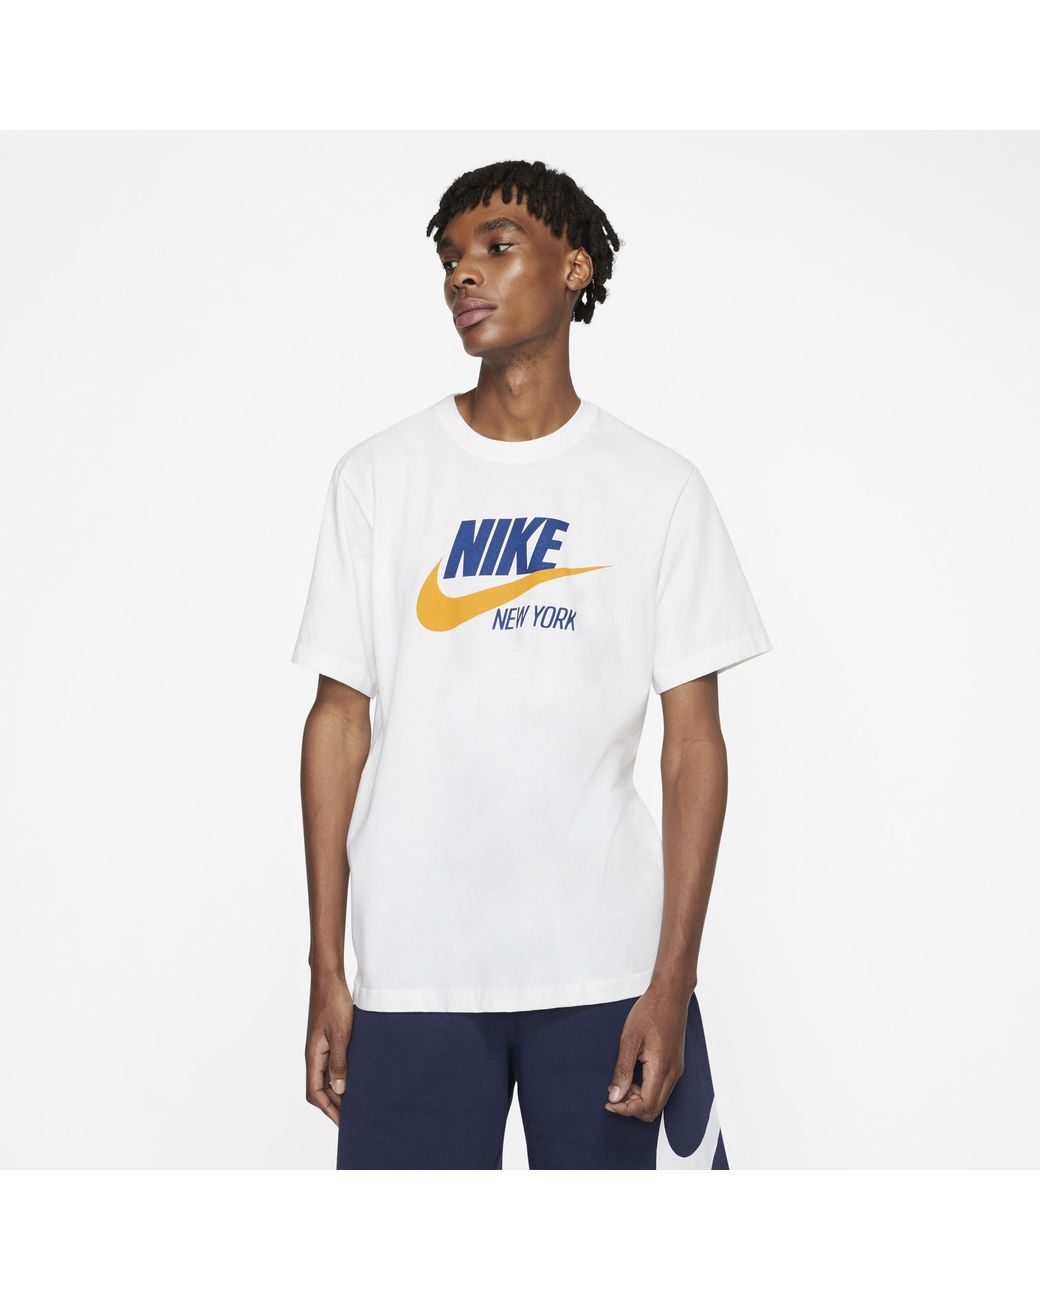 Nike Cotton Nsw City T-shirt in White/Blue (White) for Men - Lyst